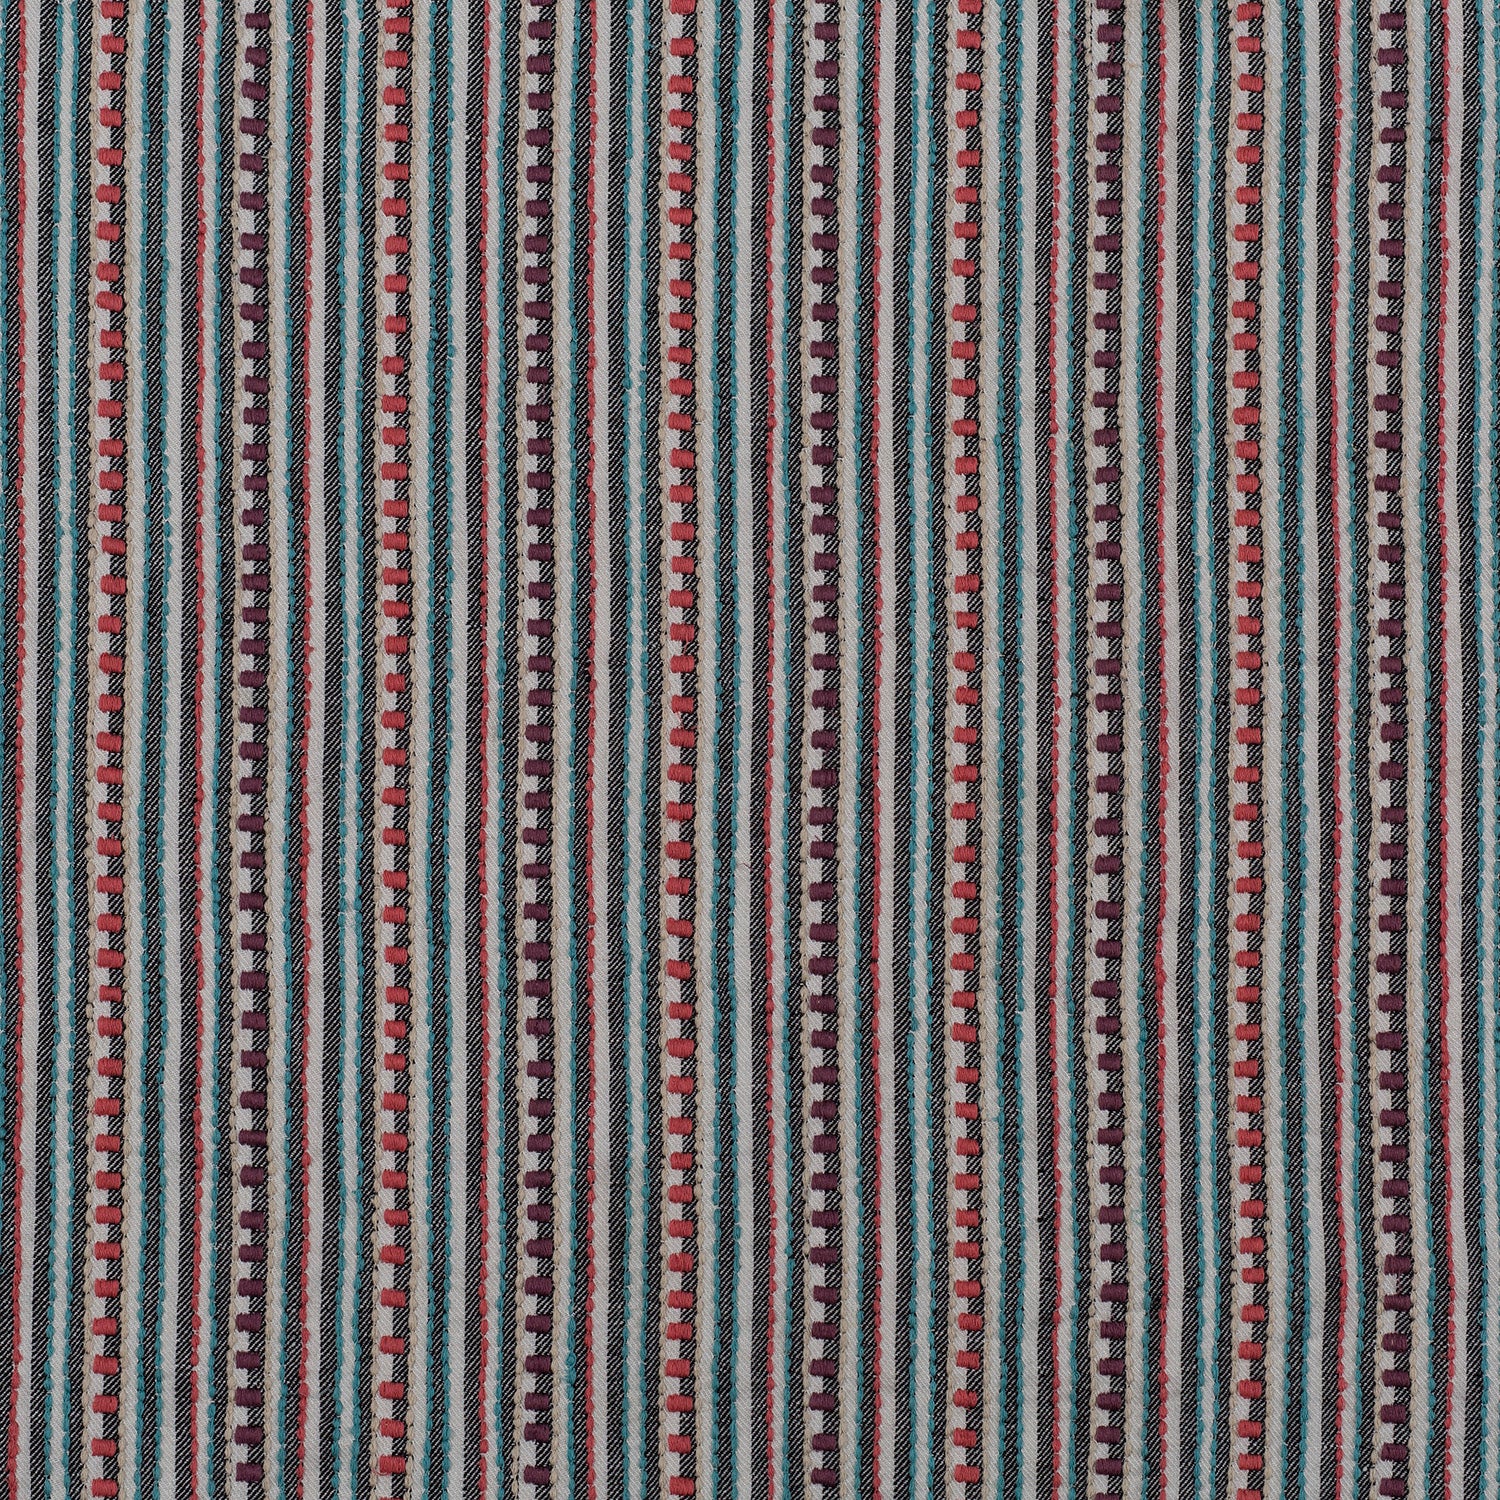 Dimensional embroidered fabric in an irregular stripe pattern in shades of red, blue and brown.